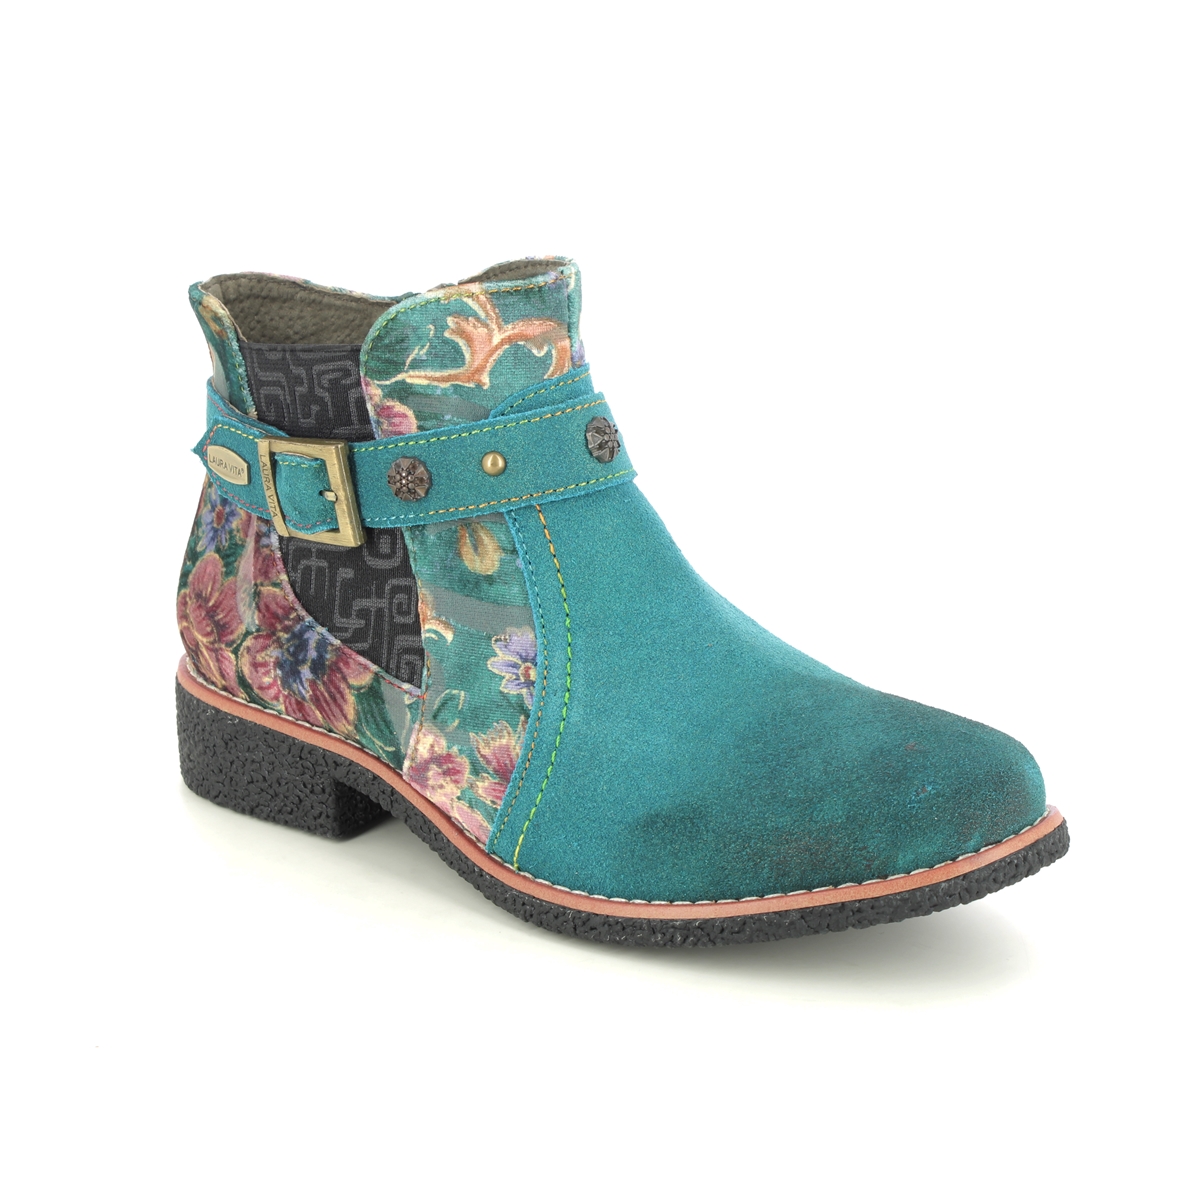 Laura Vita - Cocralieo 04 (Turquoise Leather) 4195-94 In Size 40 In Floral Turquoise Leather